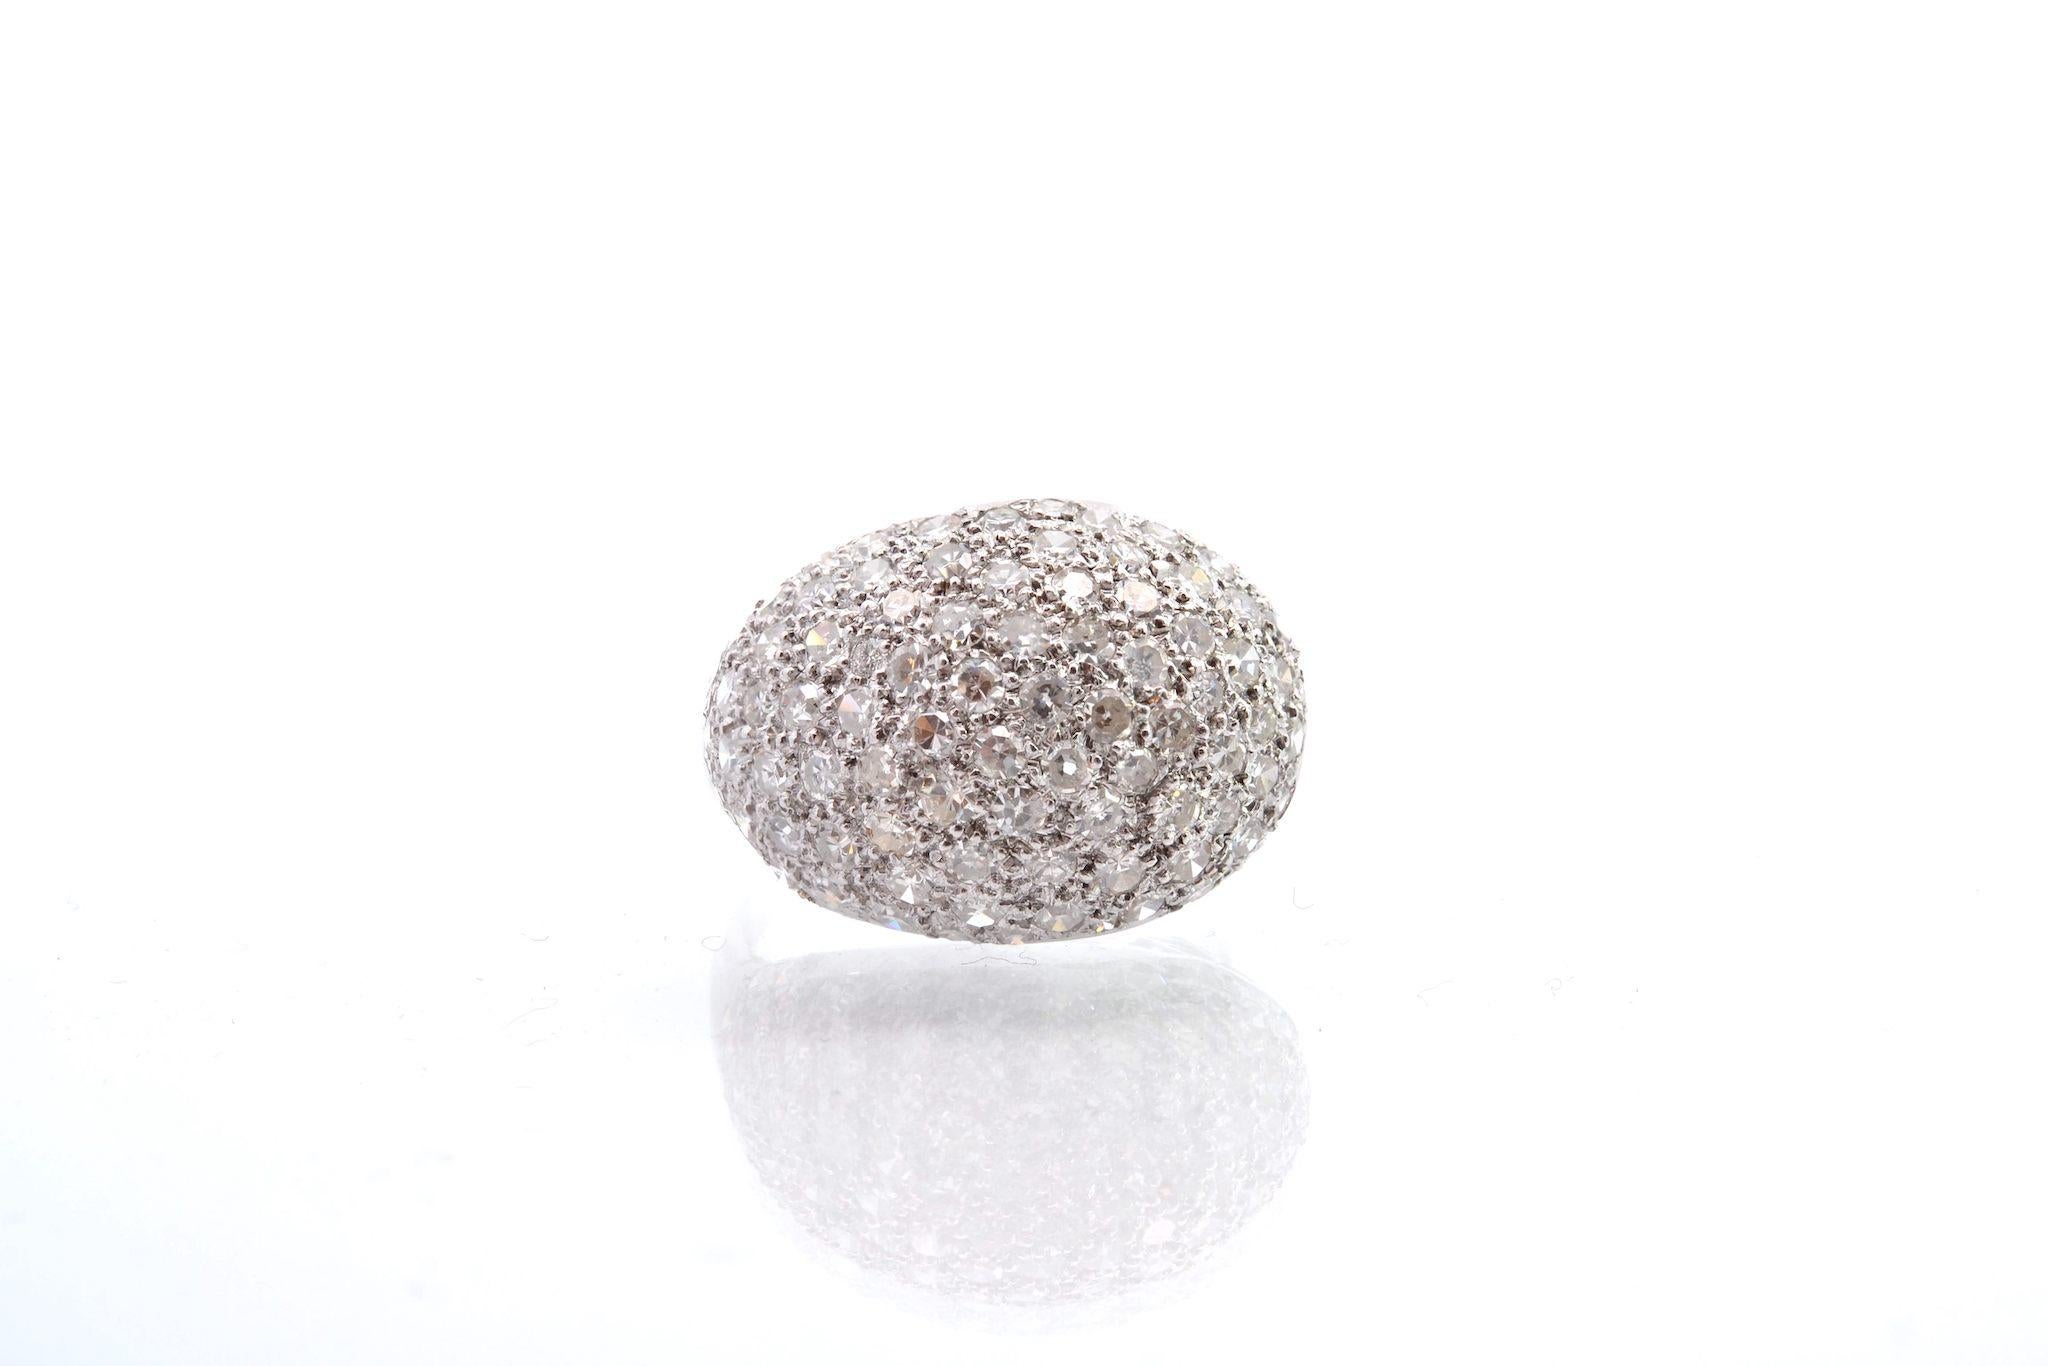 Stones: 85 diamonds 8×8: 2.40cts
Material: 18k white gold
Dimensions: 1.6cm x 2.5cm
Weight: 4.6g
Period: 1950
Size: 56 (free sizing)
Certificate
Ref. : 25243